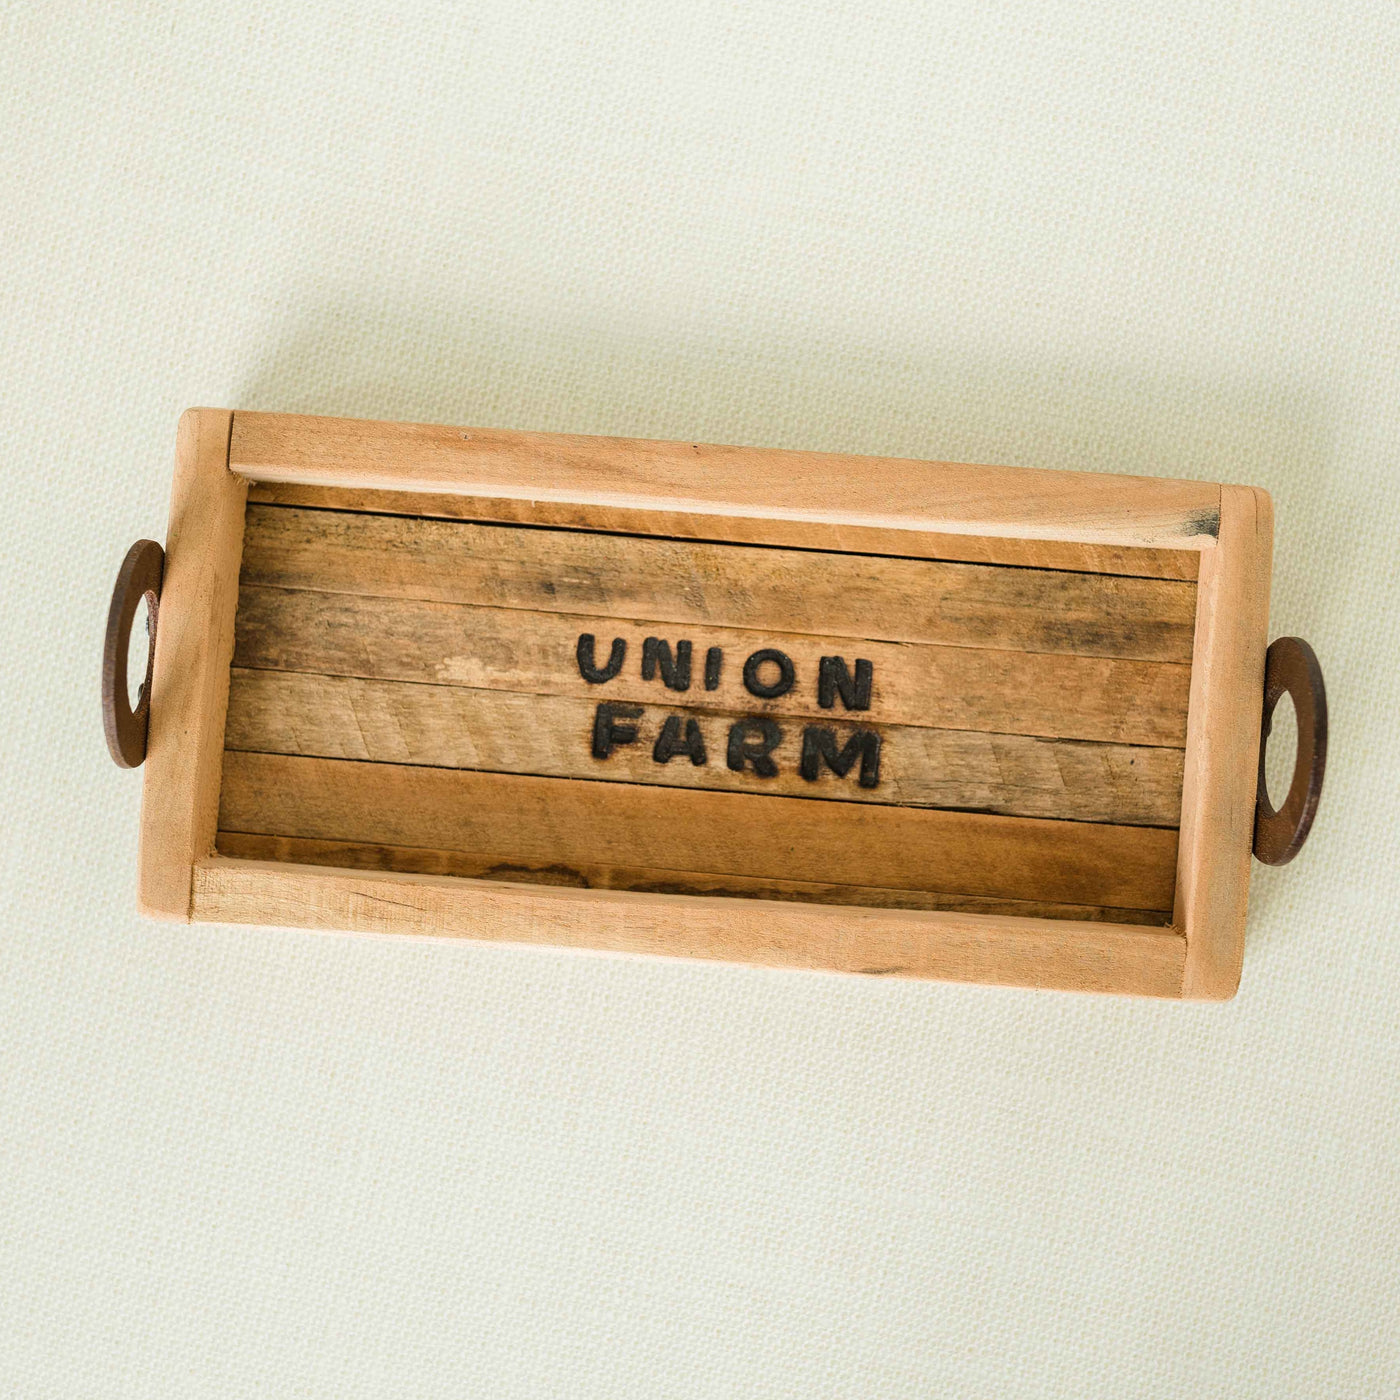 Rustic Wooden Tray